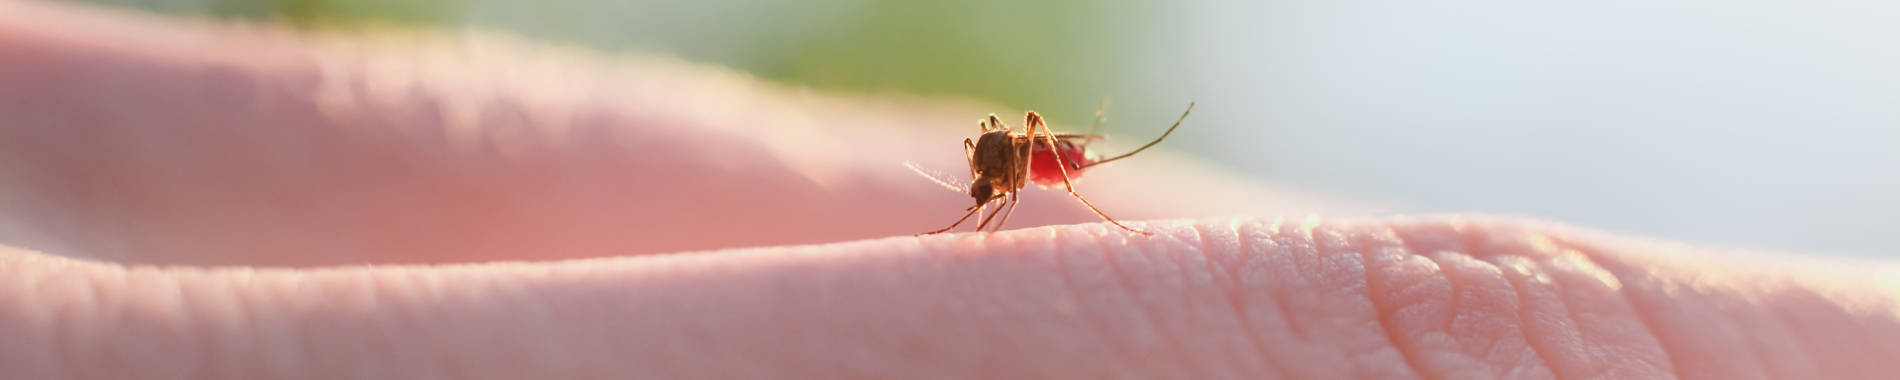 The bite of a mosquito with blood on human body